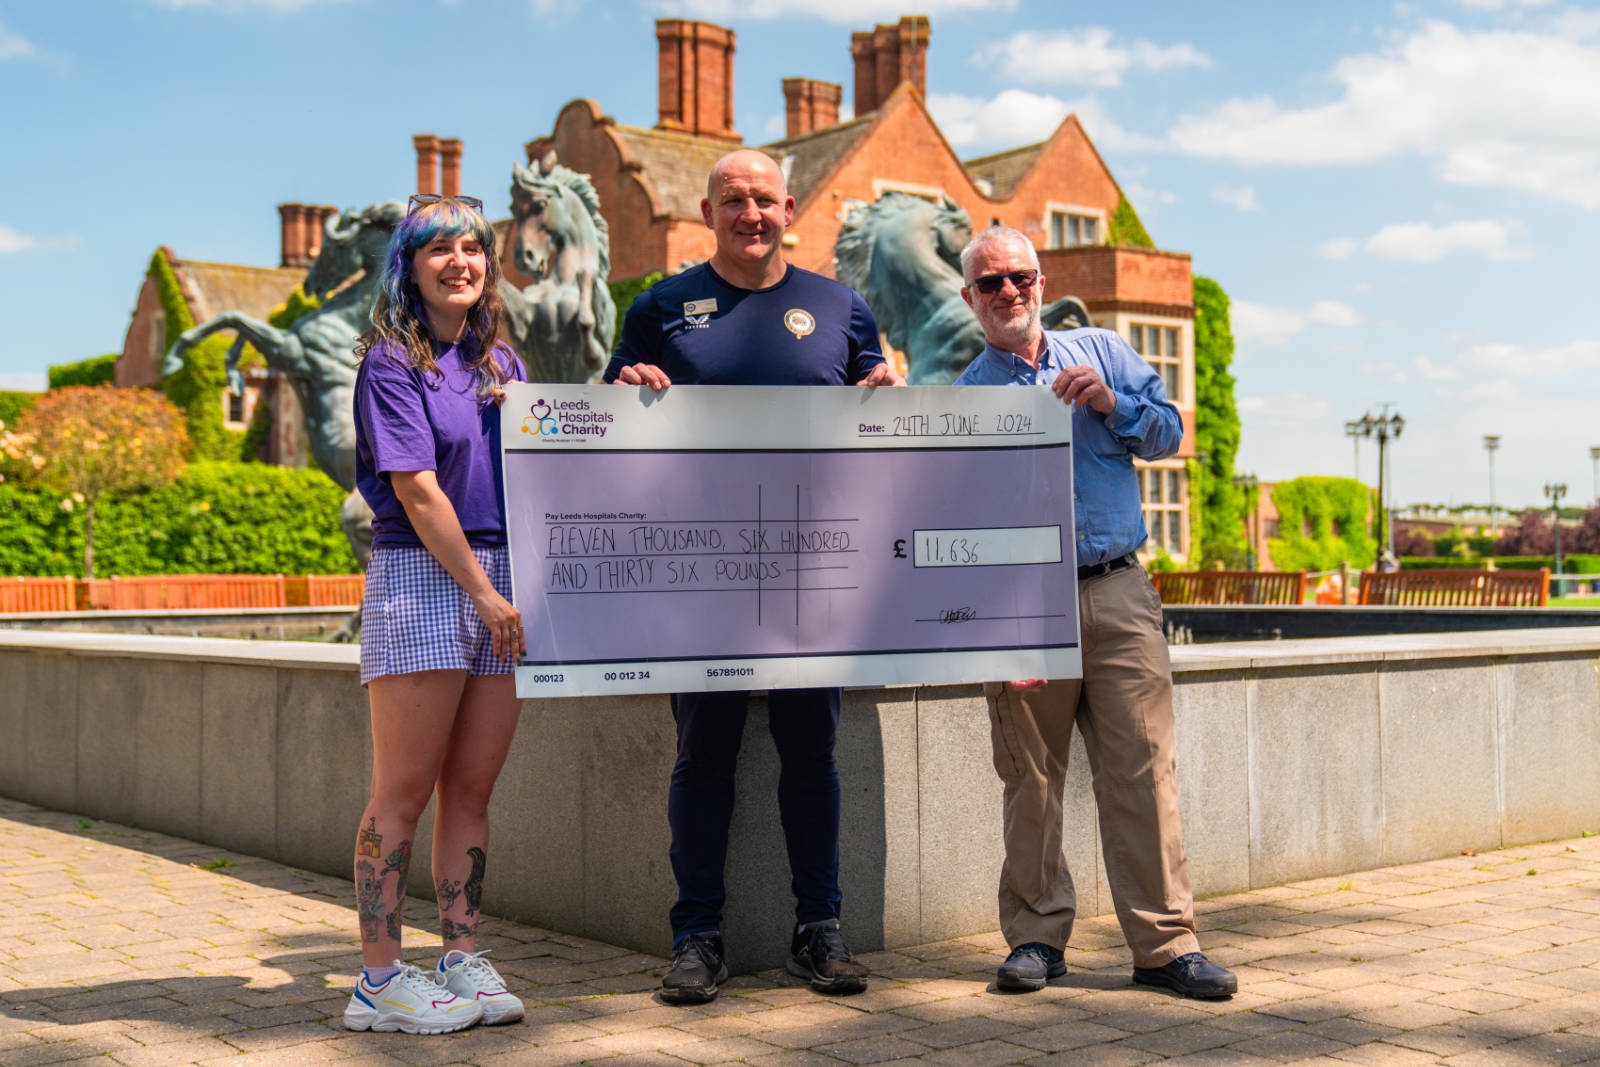 Rob Rawlinson, Head of Sport and David Payne, Head of English at Queen Ethelburga’s Collegiate present the final cheque from the fundraiser to Charlotte Bray from Leeds Hospitals Charity